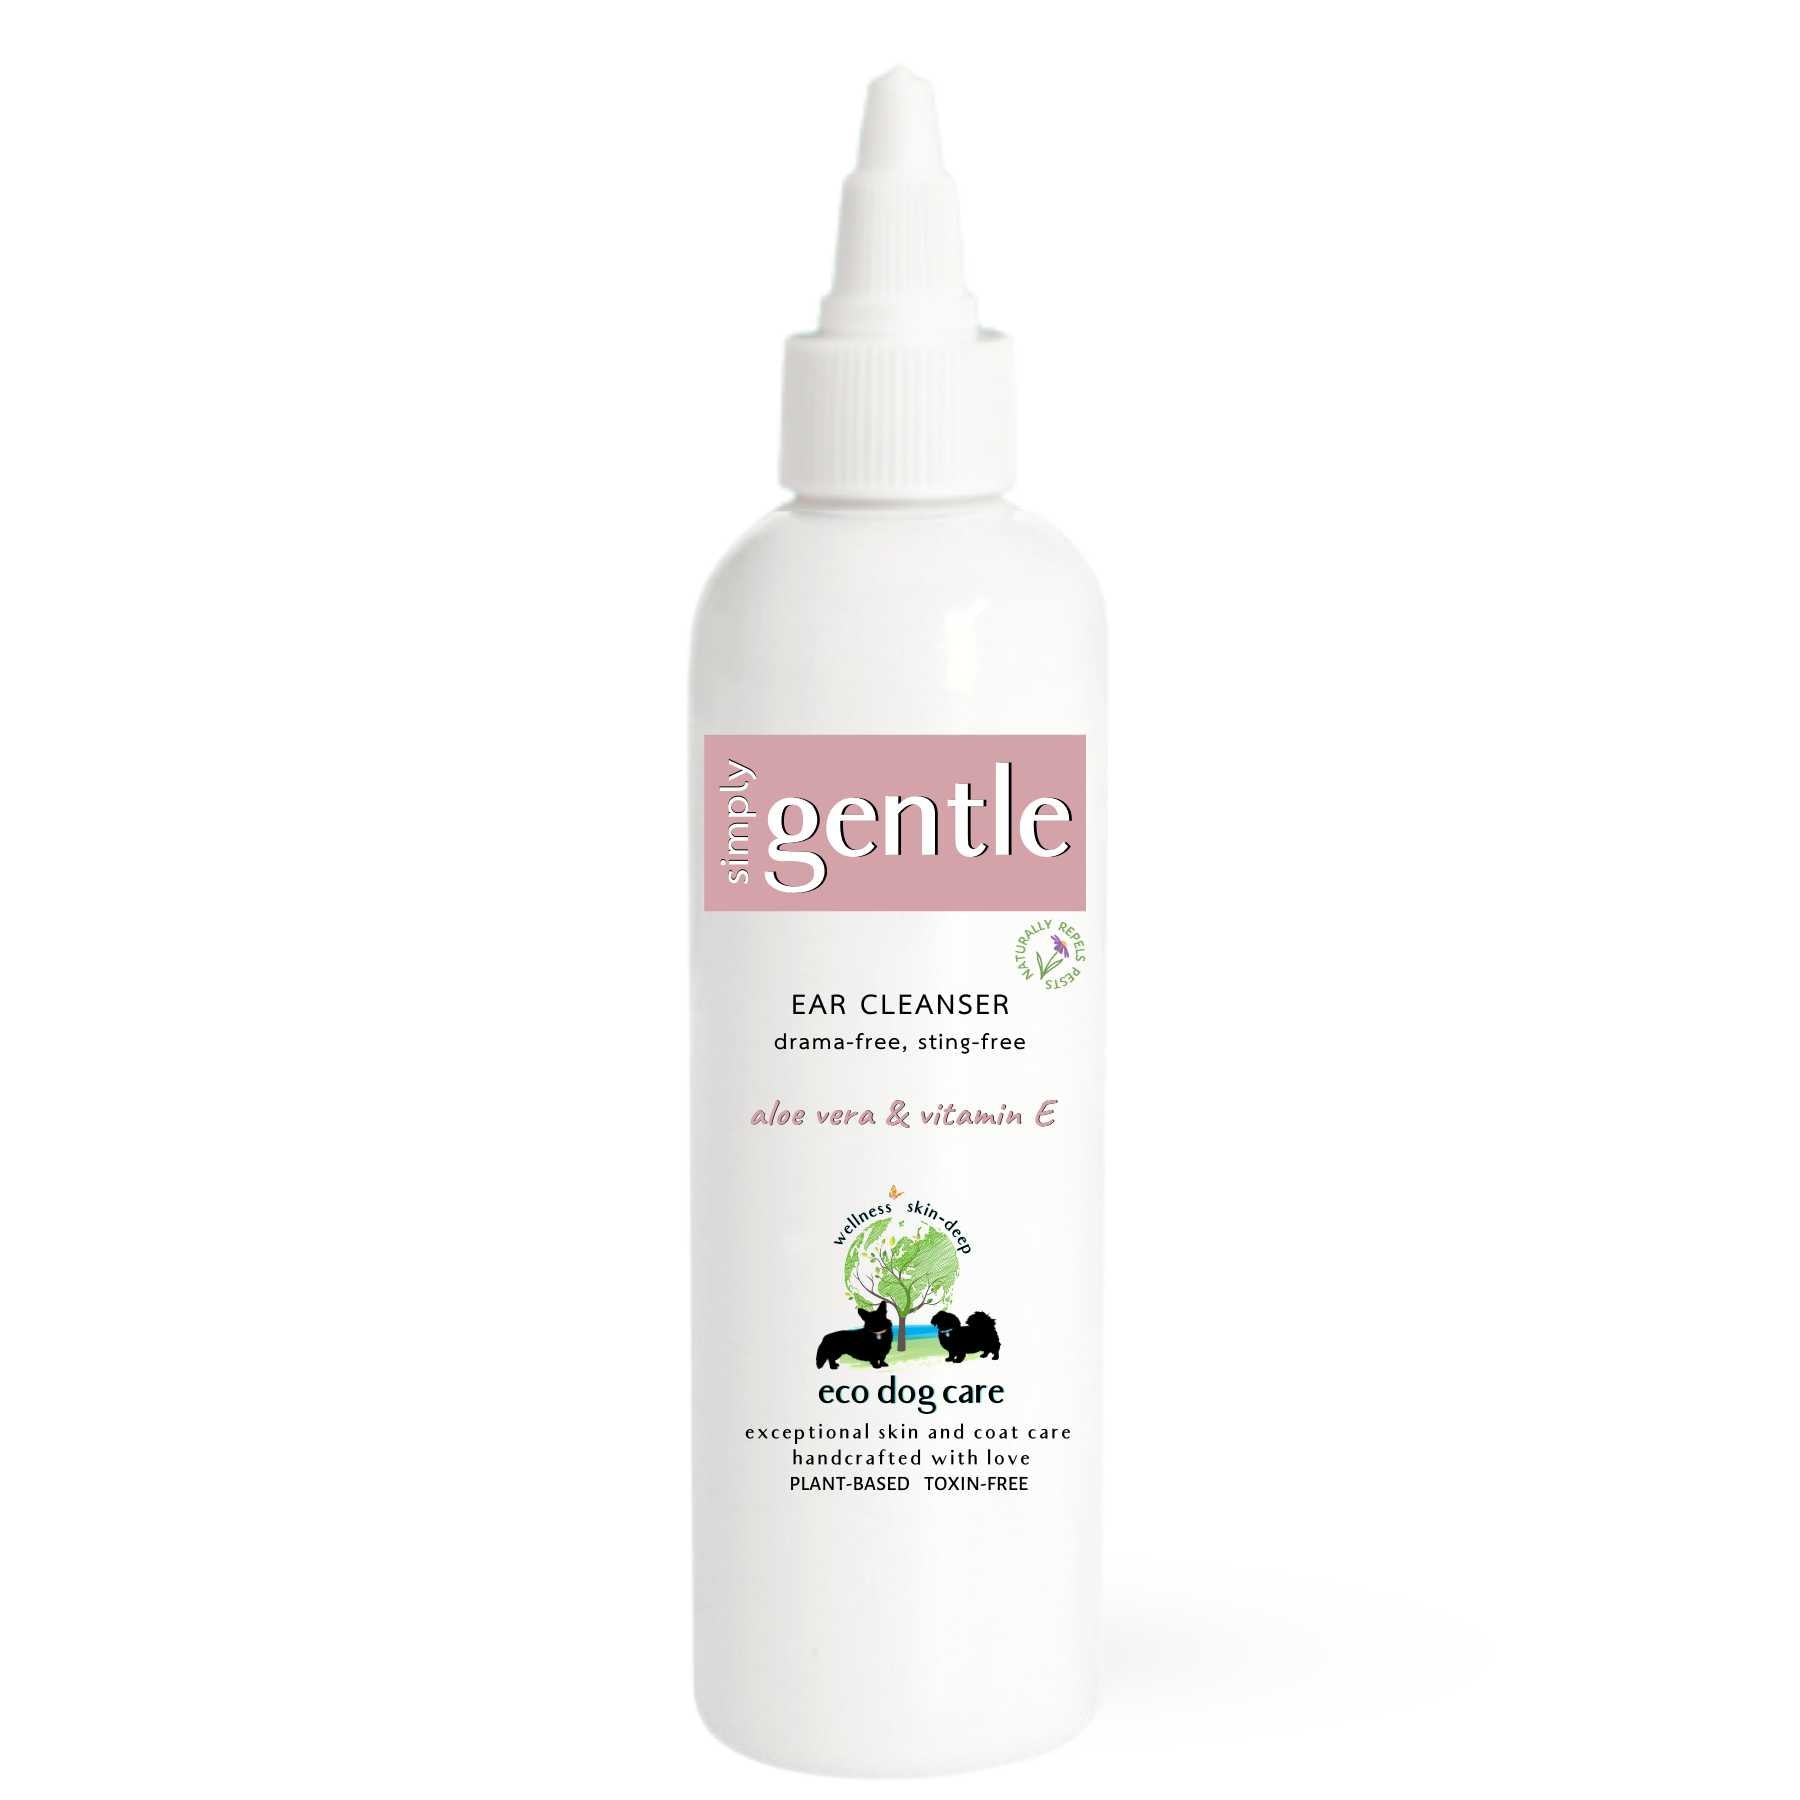 Simply Gentle Ear Cleanser For Alcohol-Free, Sting-Free Care Eco Dog Care